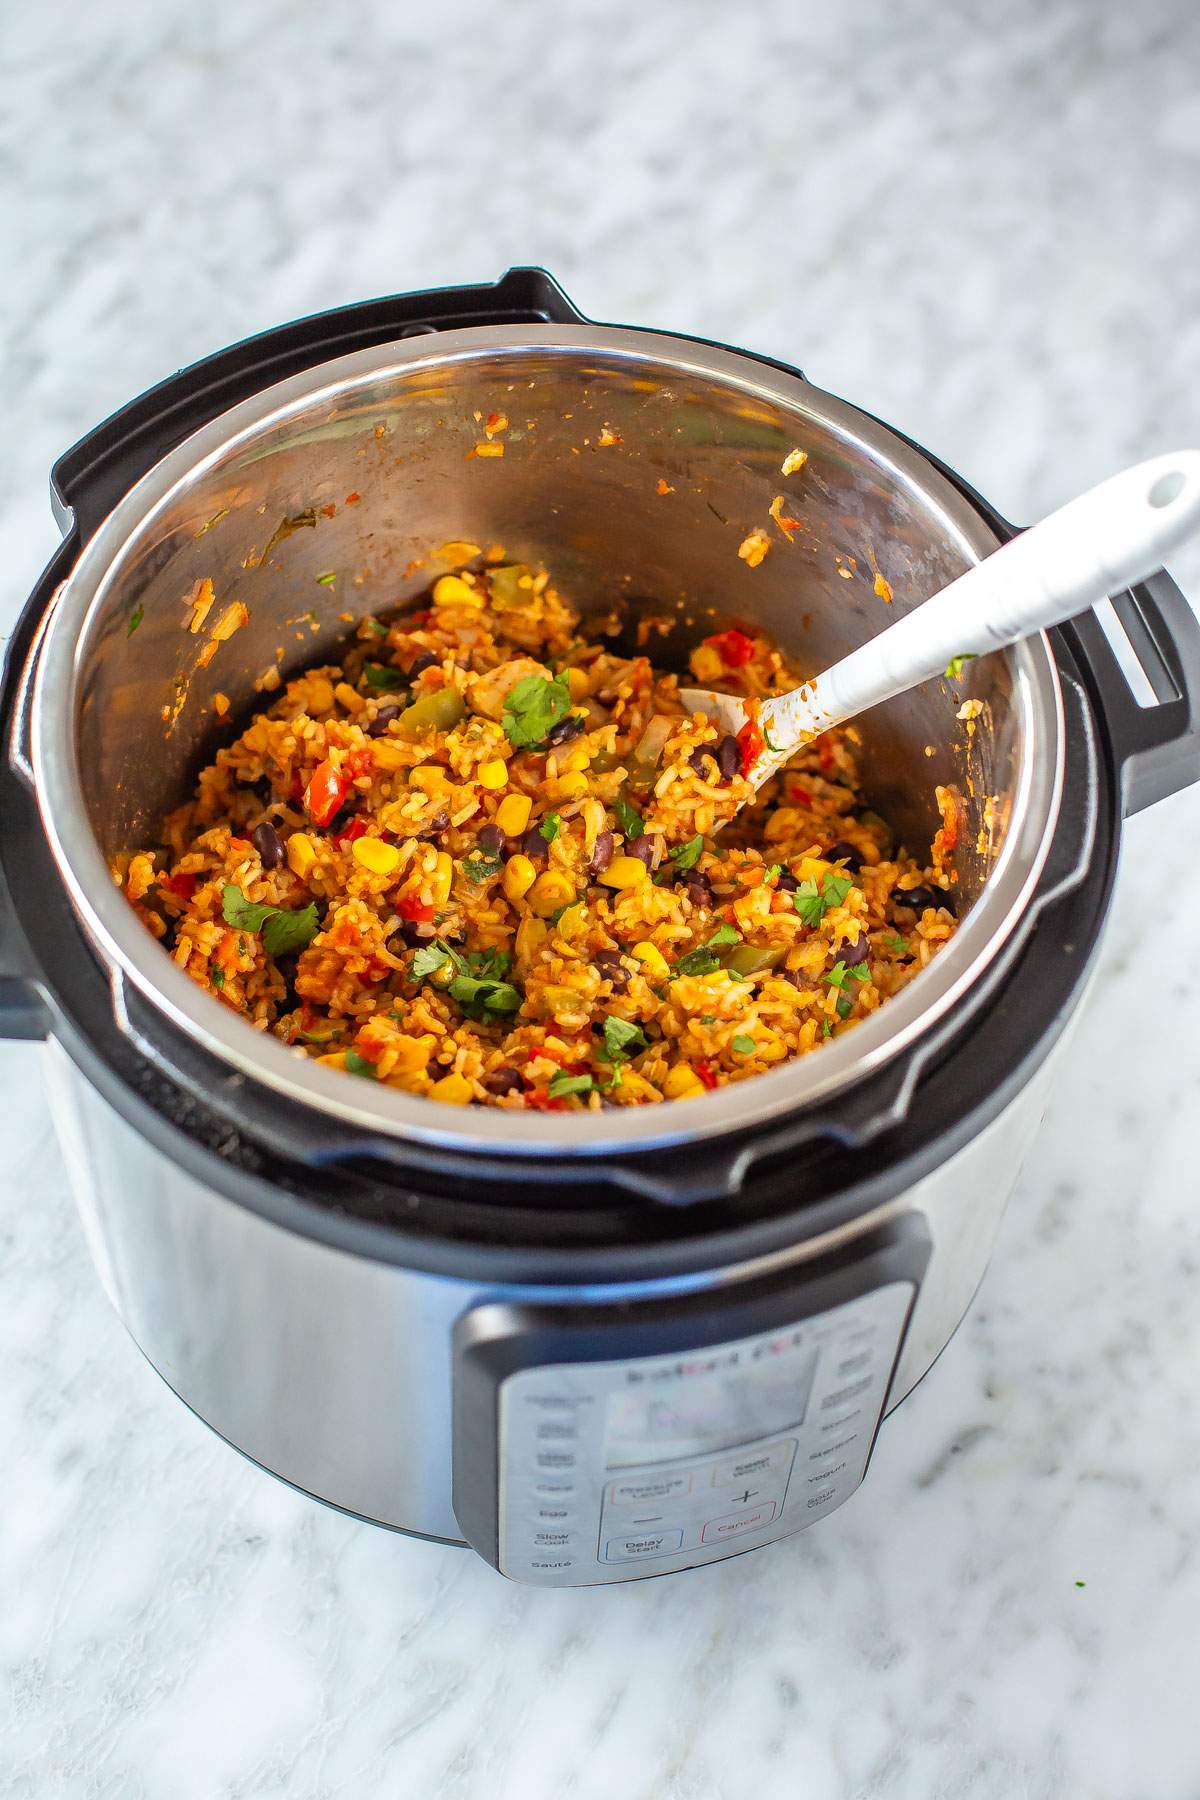 An Instant Pot with chicken burrito bowls filling inside.